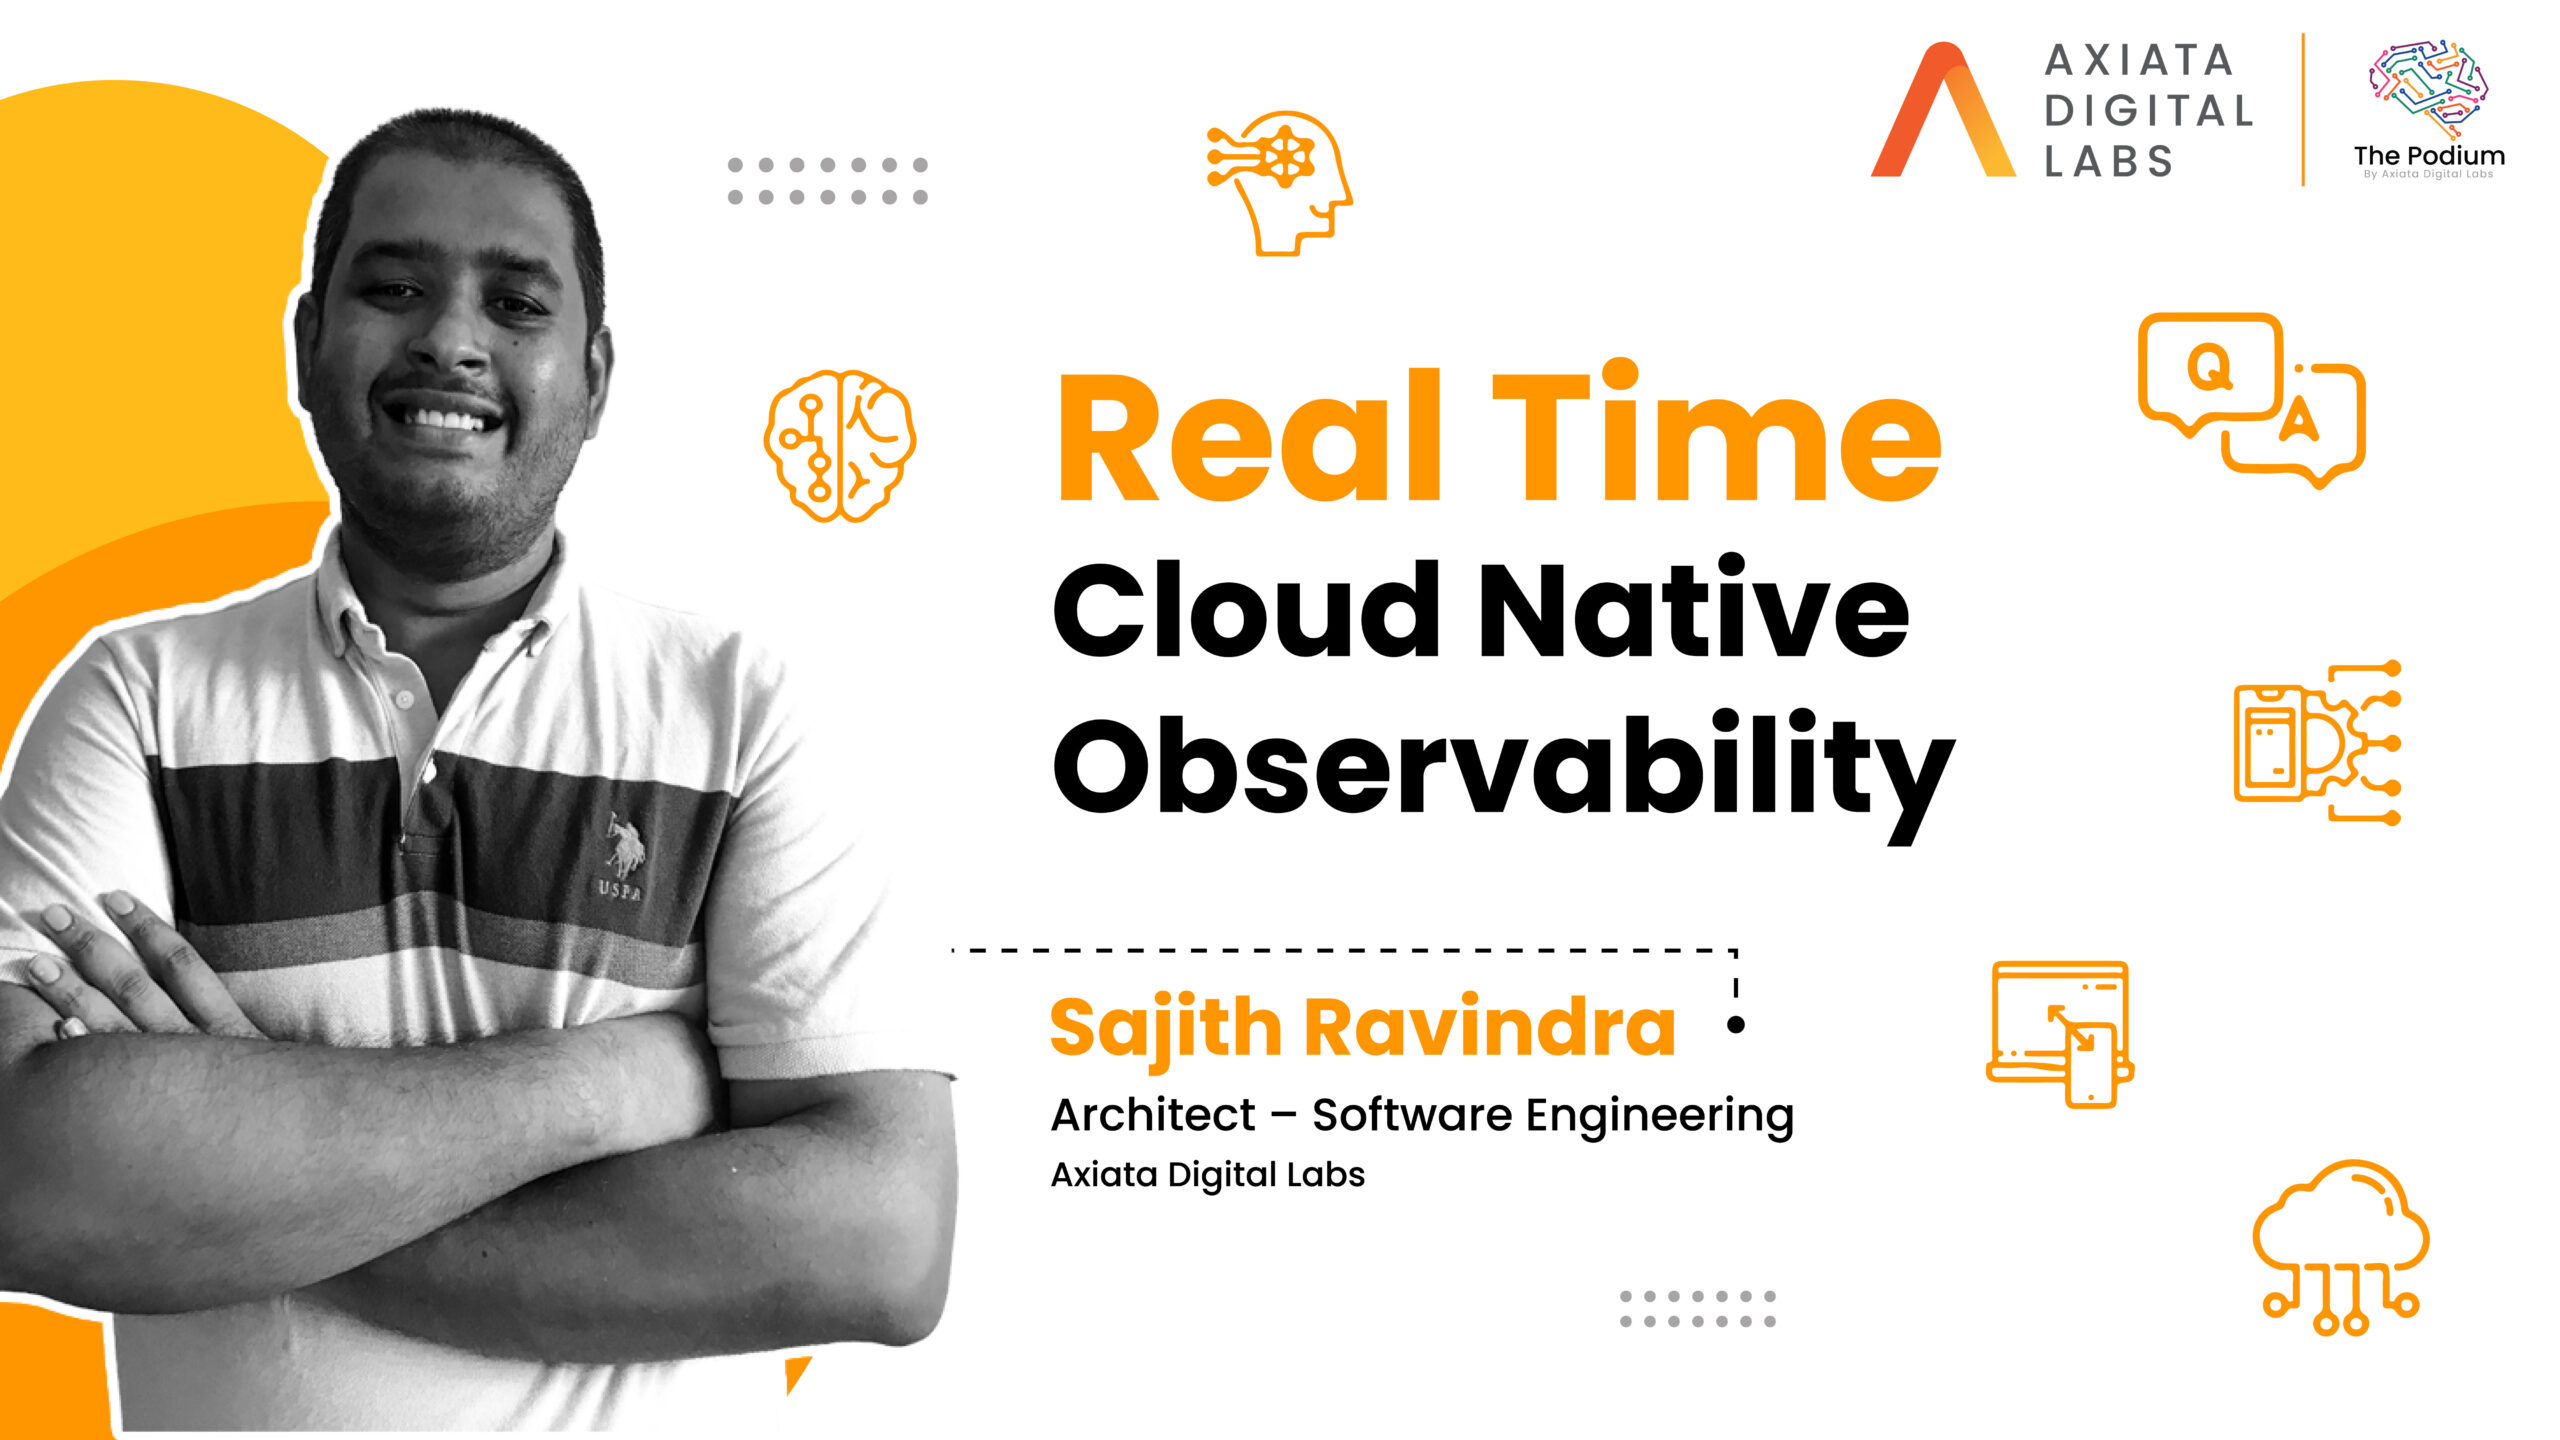 Real Time Cloud Native Observaility